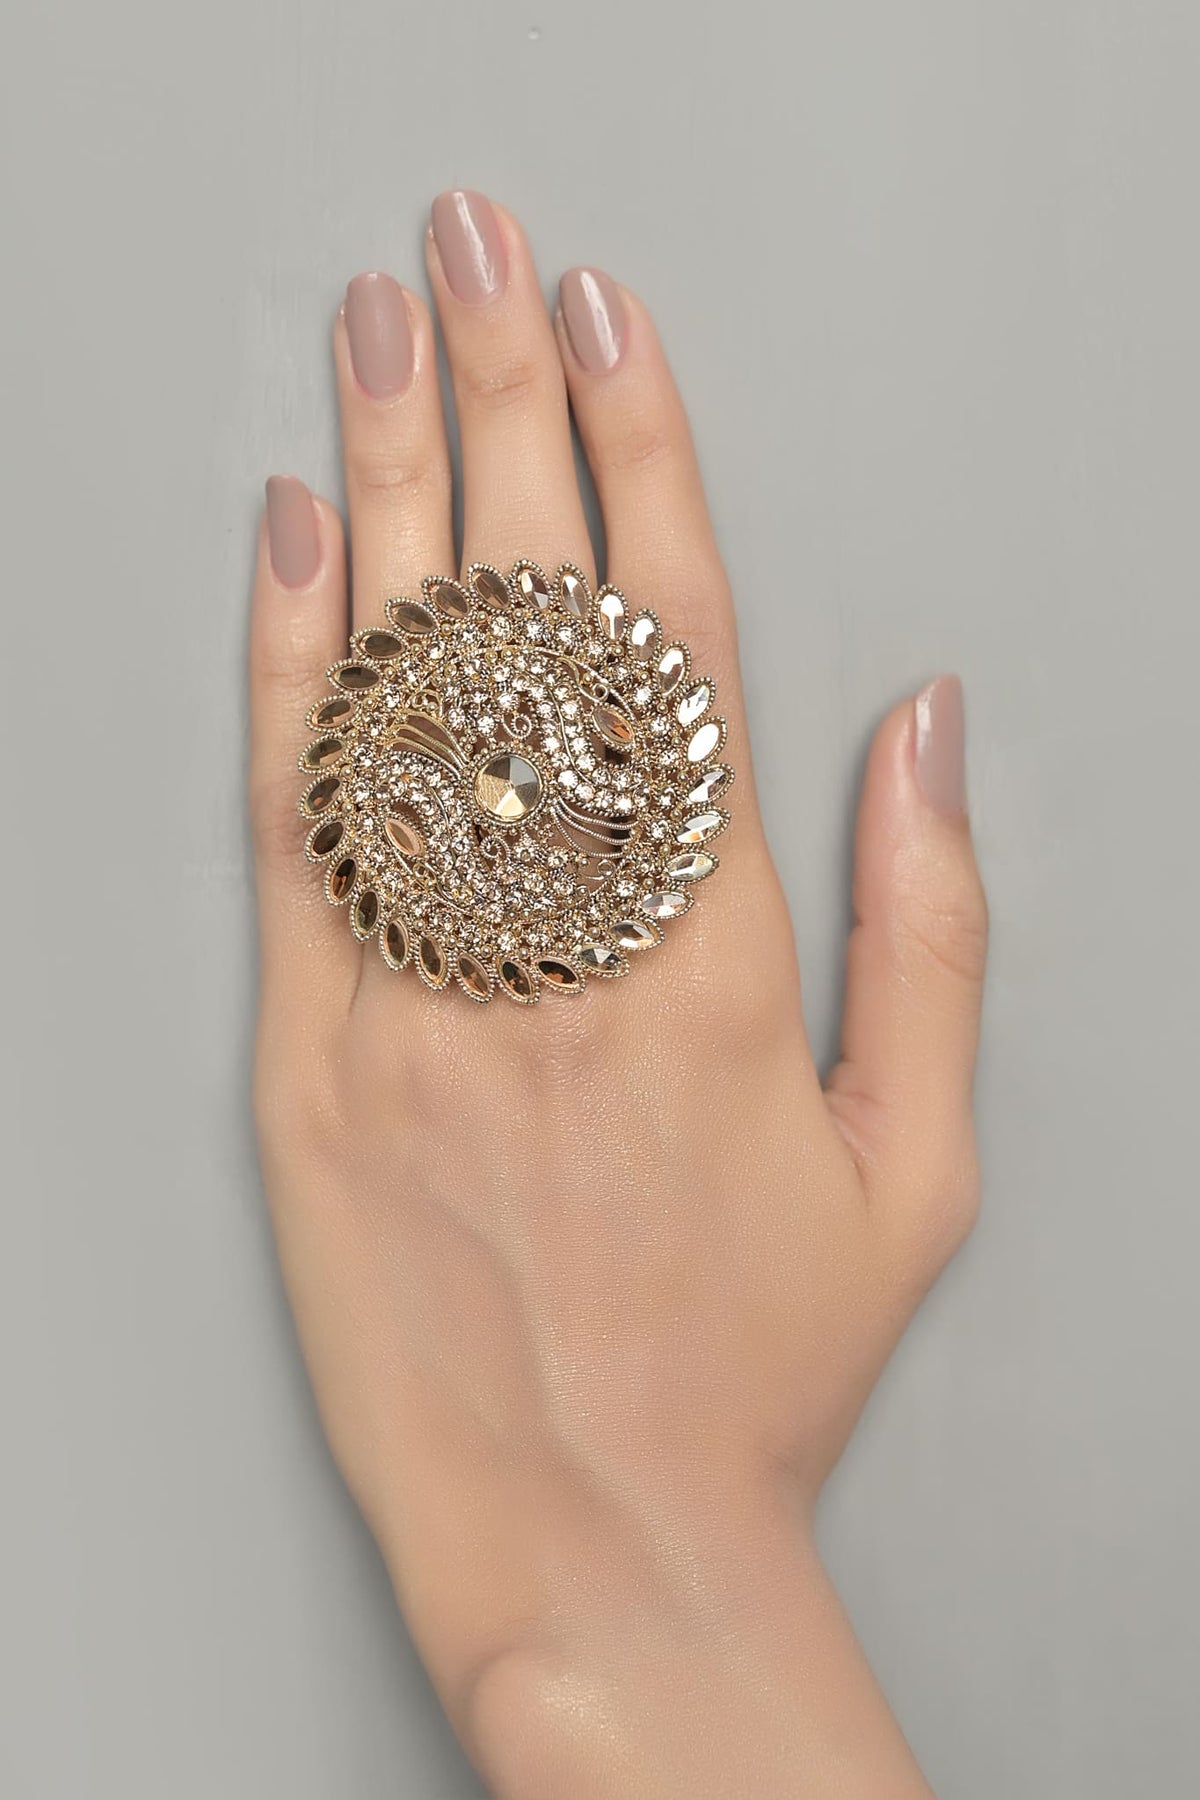 Beautiful Adjustable Ring-OLJ-446-Golden And Champagne